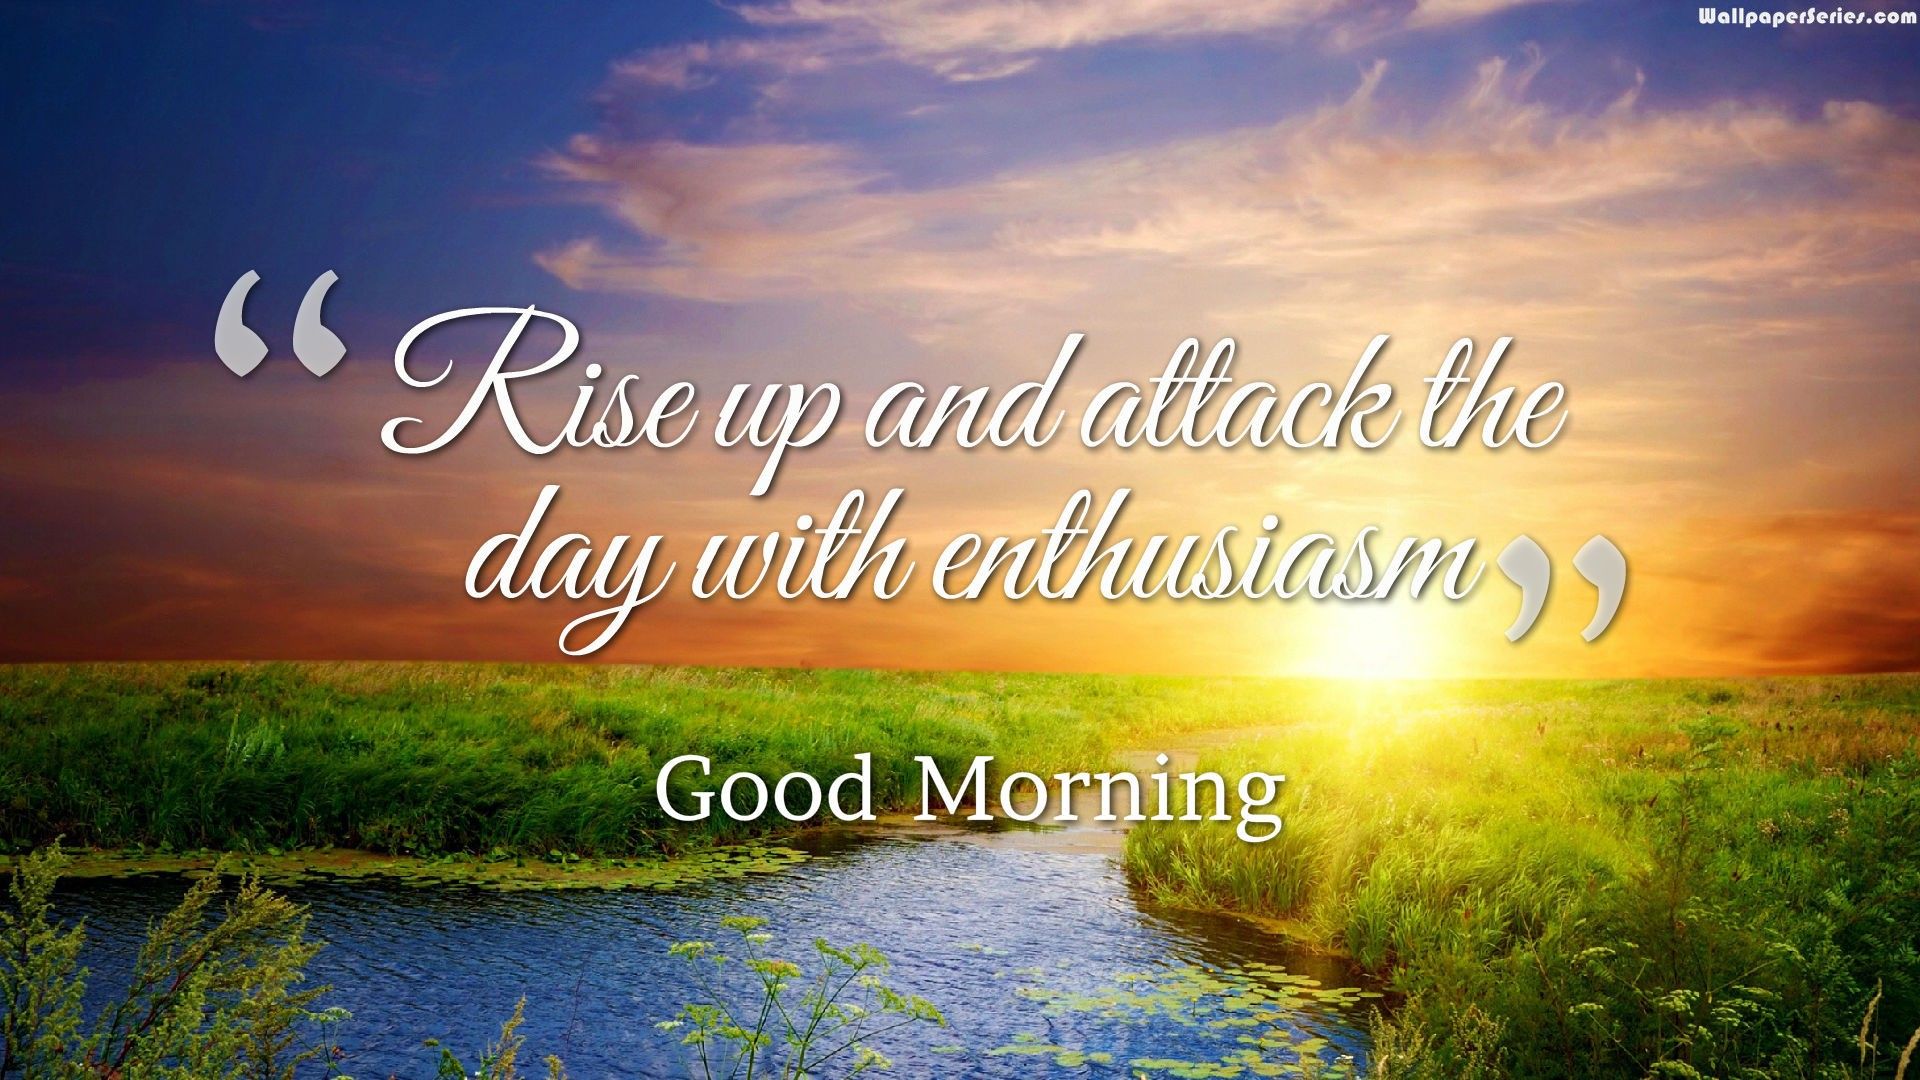 Rise Up With Enthusiasm Good Morning Quotes Wallpapers 05849.